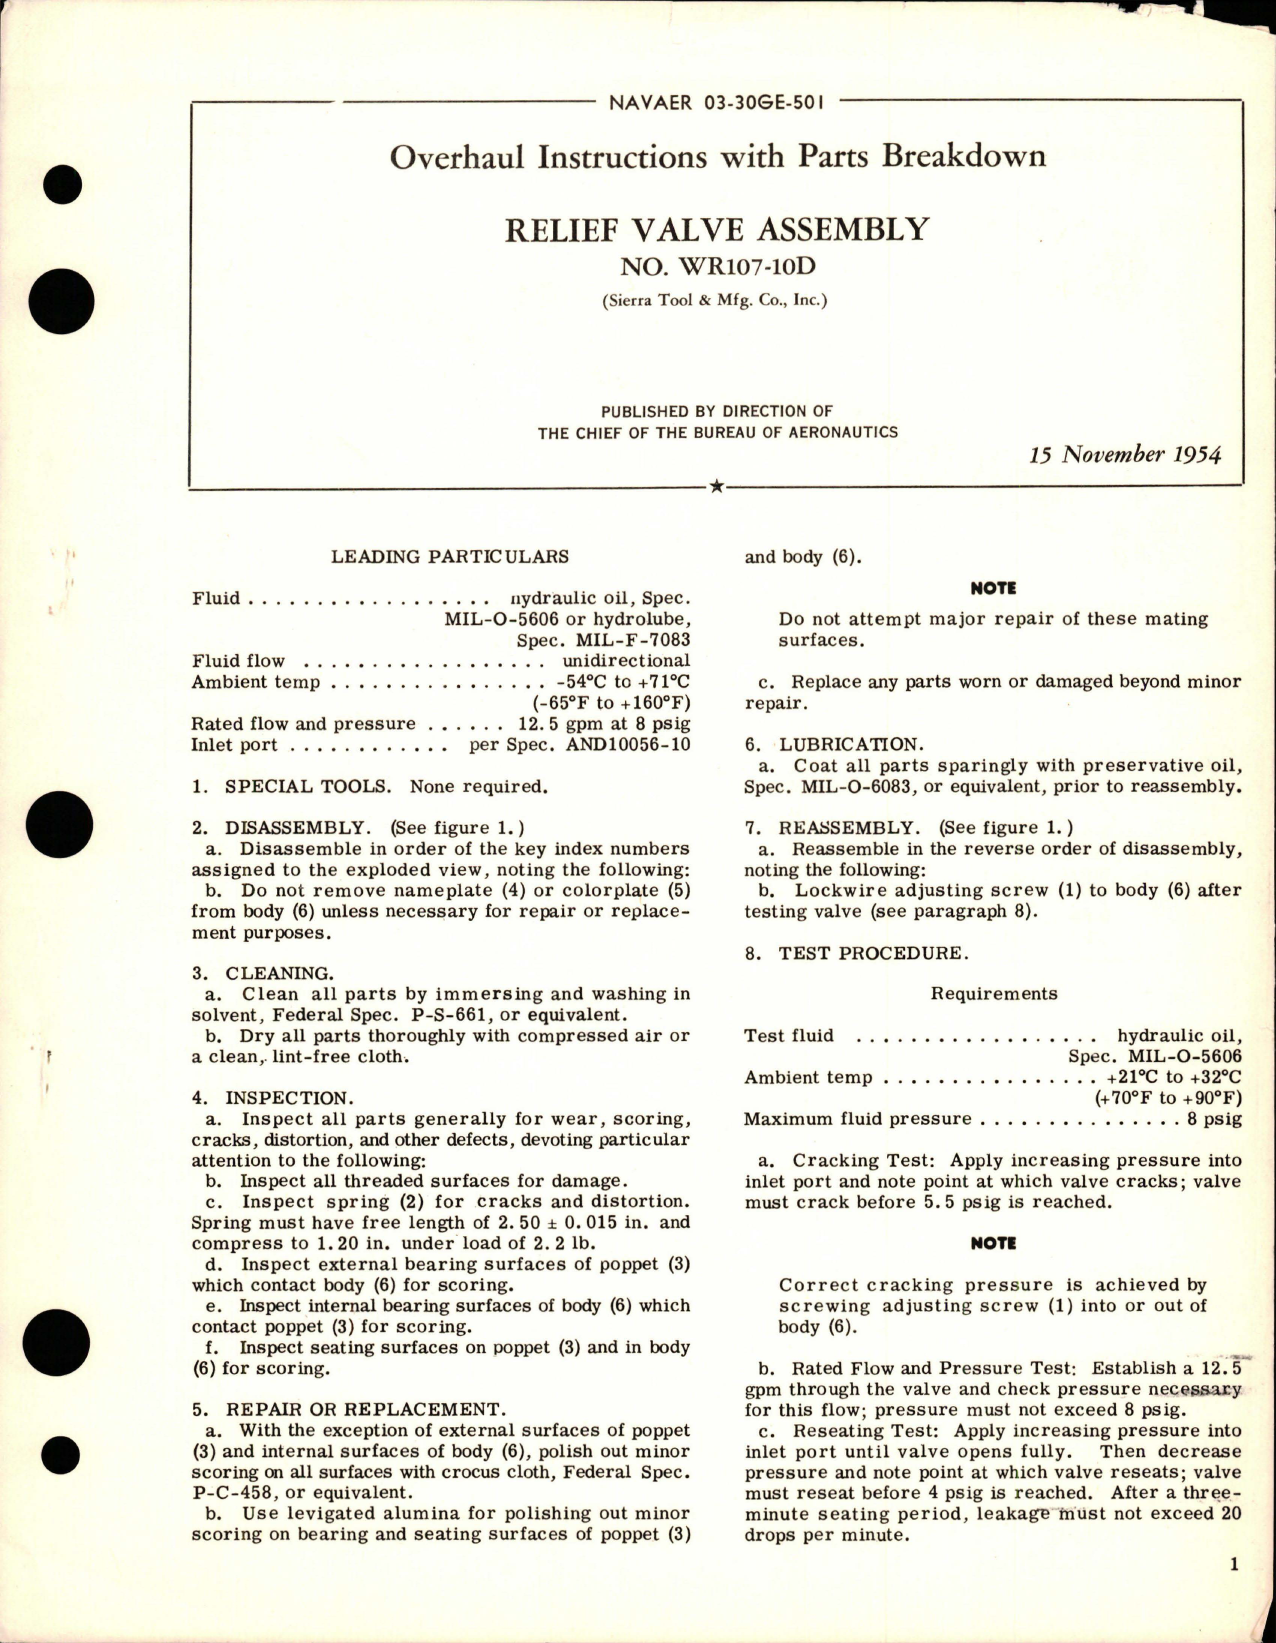 Sample page 1 from AirCorps Library document: Overhaul Instructions with Parts Breakdown for Relief Valve Assembly - WR107-10D 